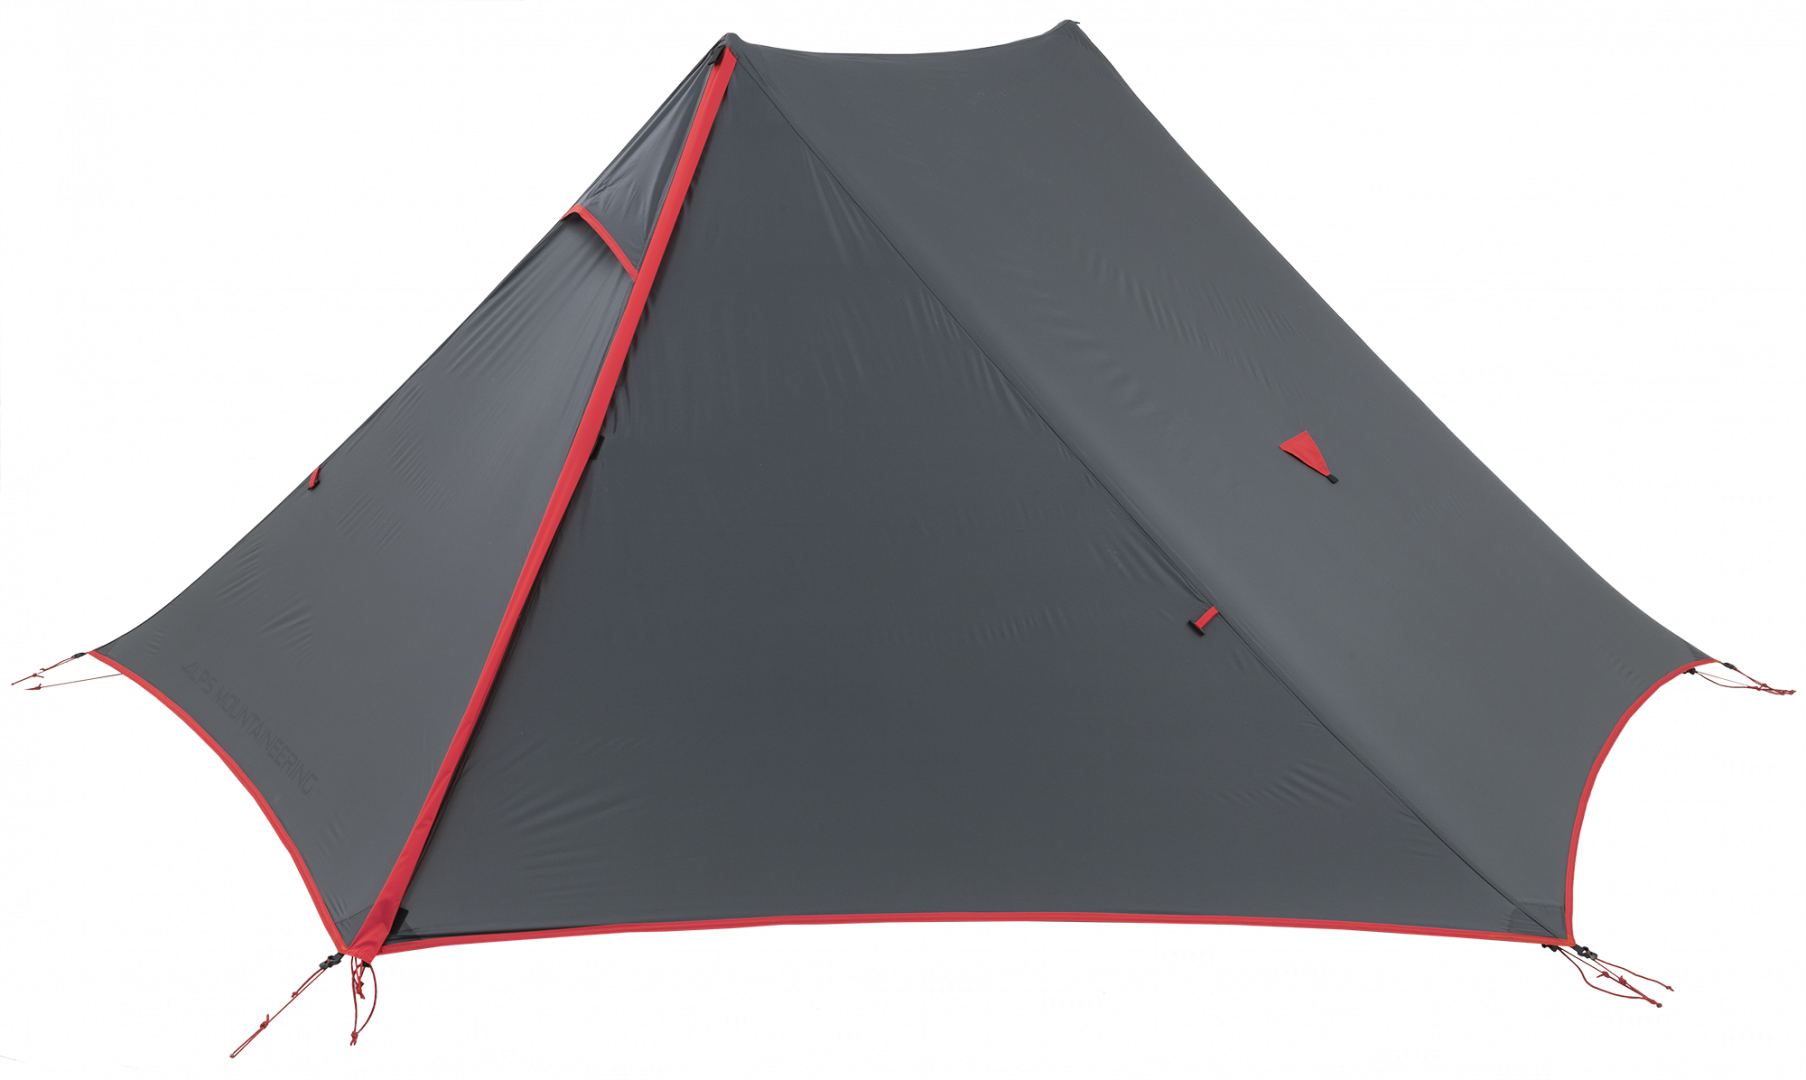 Gear up for camping season with the ALPS Hex 2 Backpacking Tent